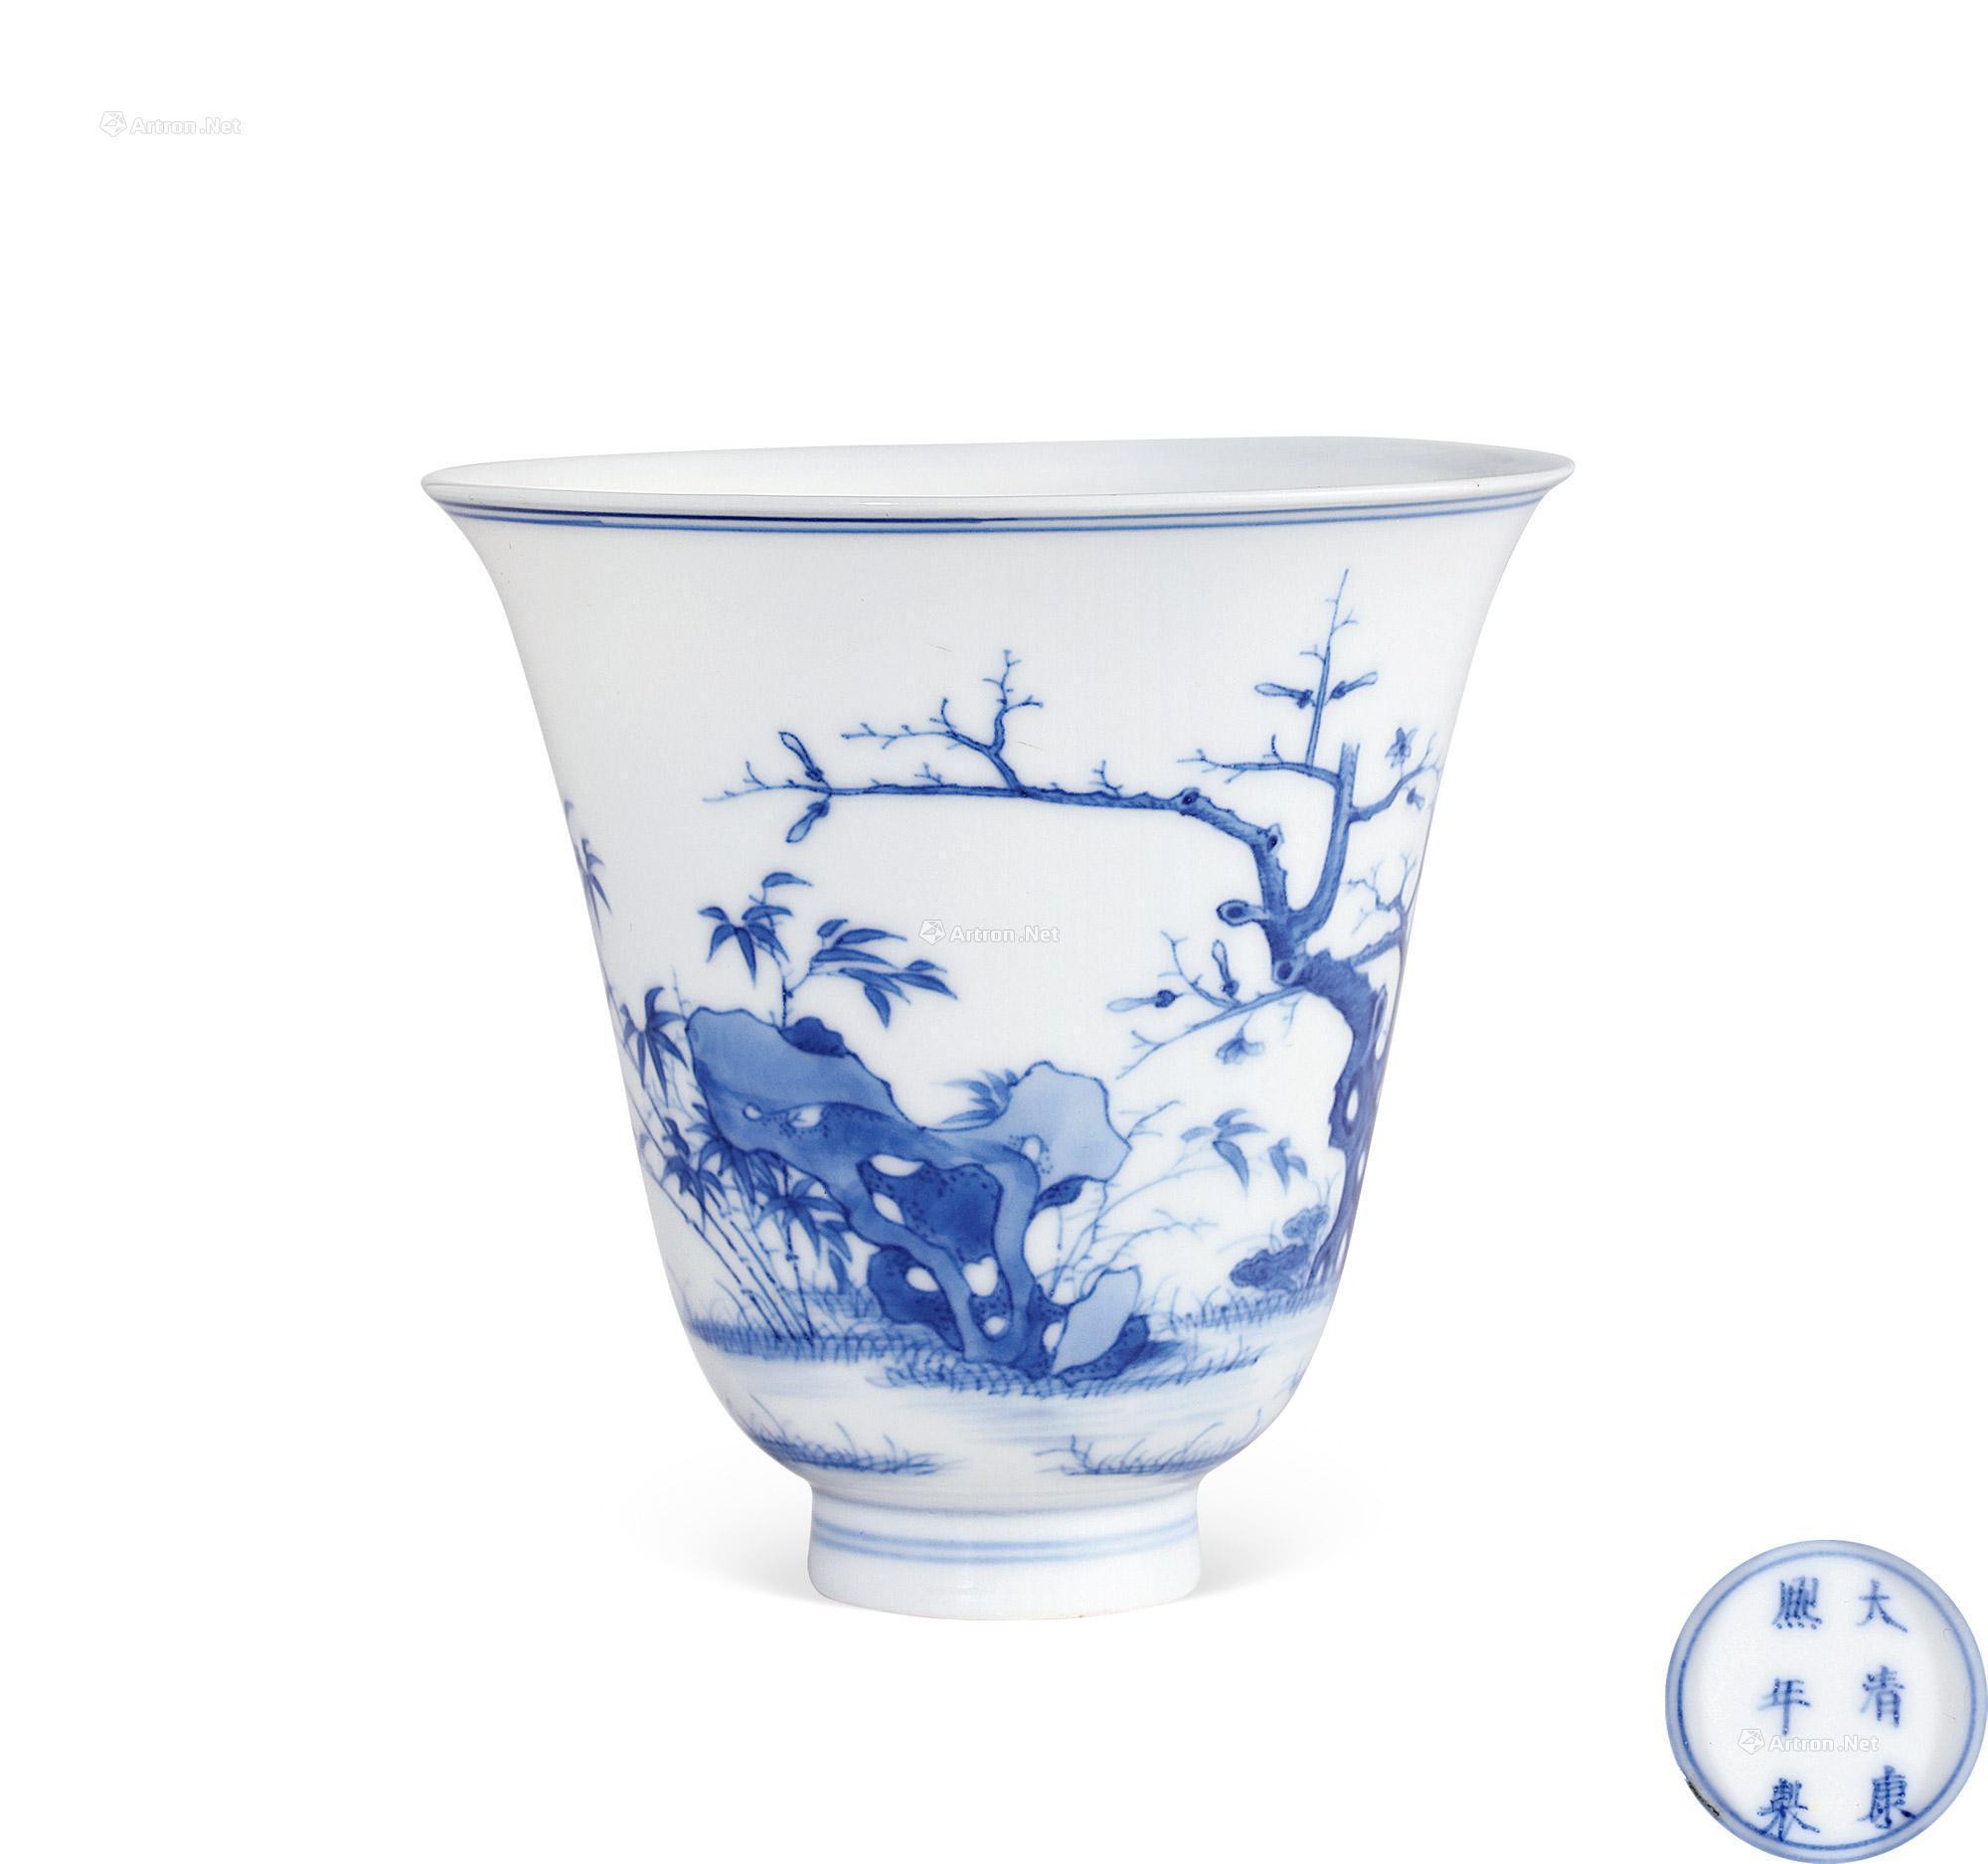 A RARE BLUE AND WHITE‘BAMBOO AND LINGZHI’ WINE CUP